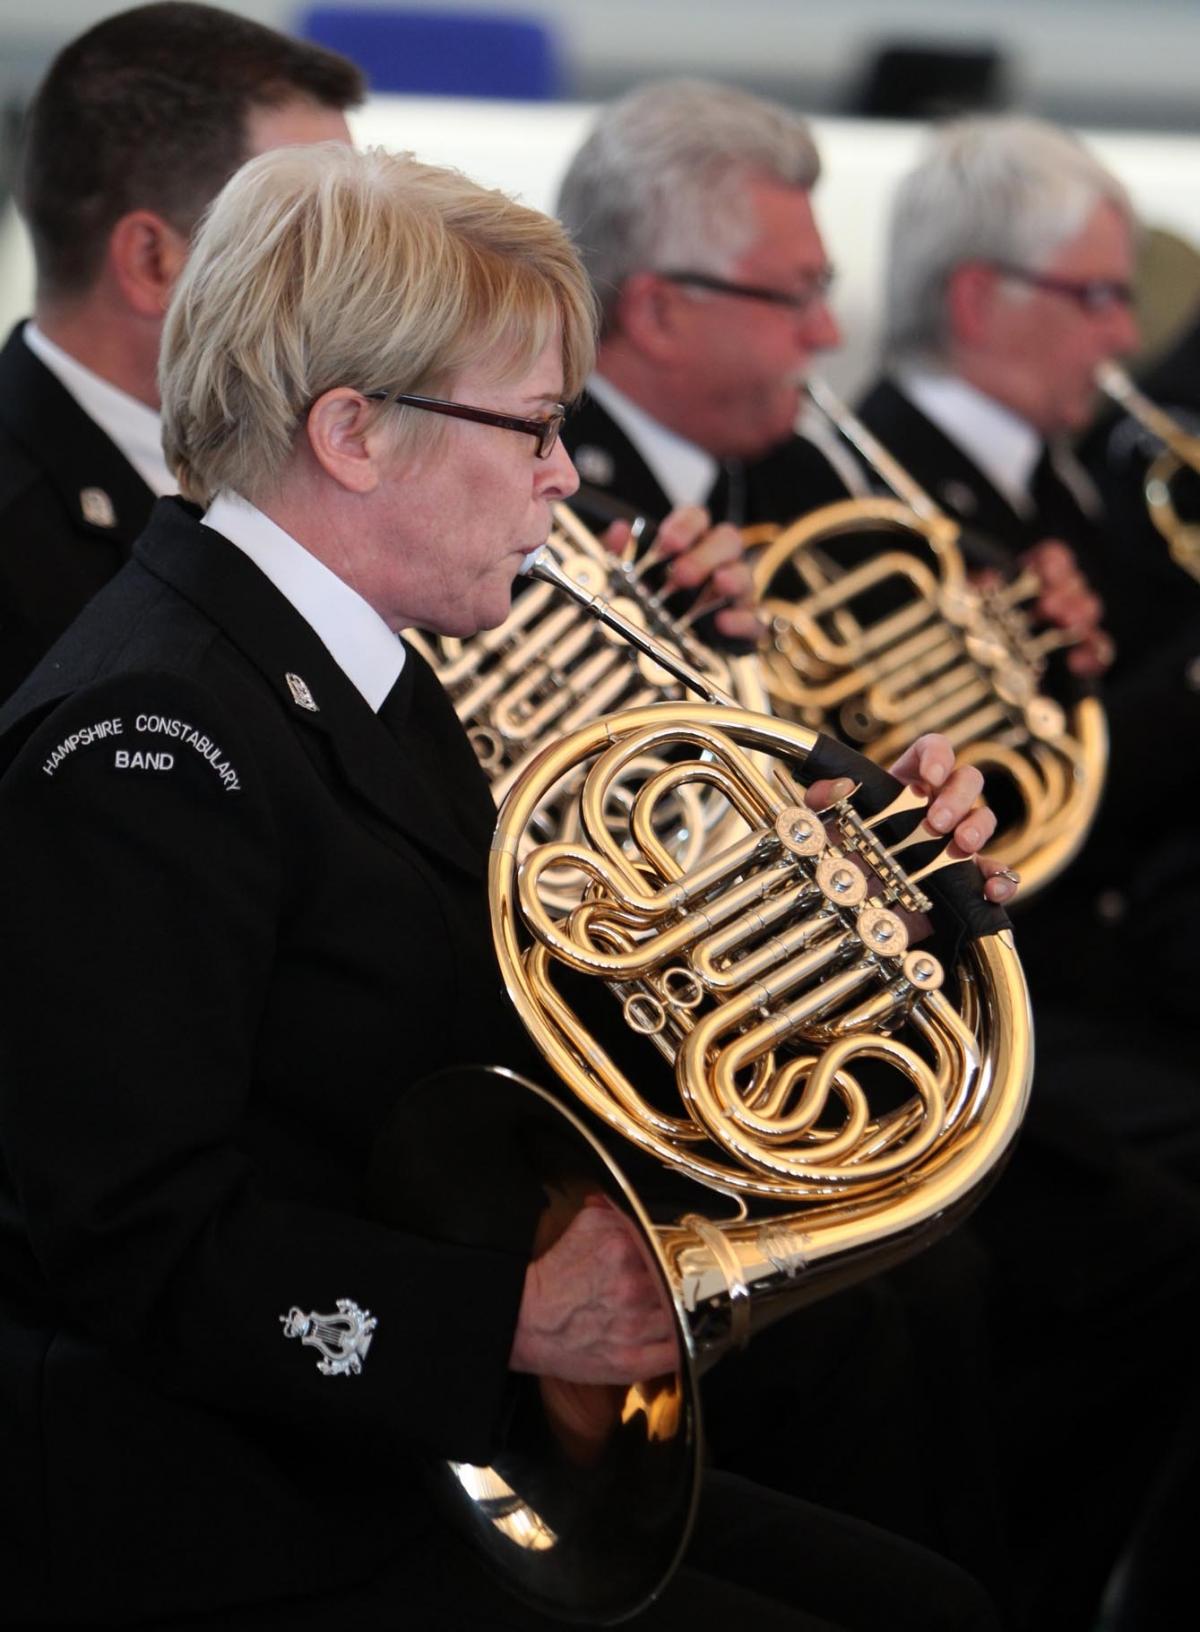 D-Day concert given by the Band of The Hampshire Constabulary at the Ocean Terminal, Southampton. D-Day Commemorations in Hampshire.